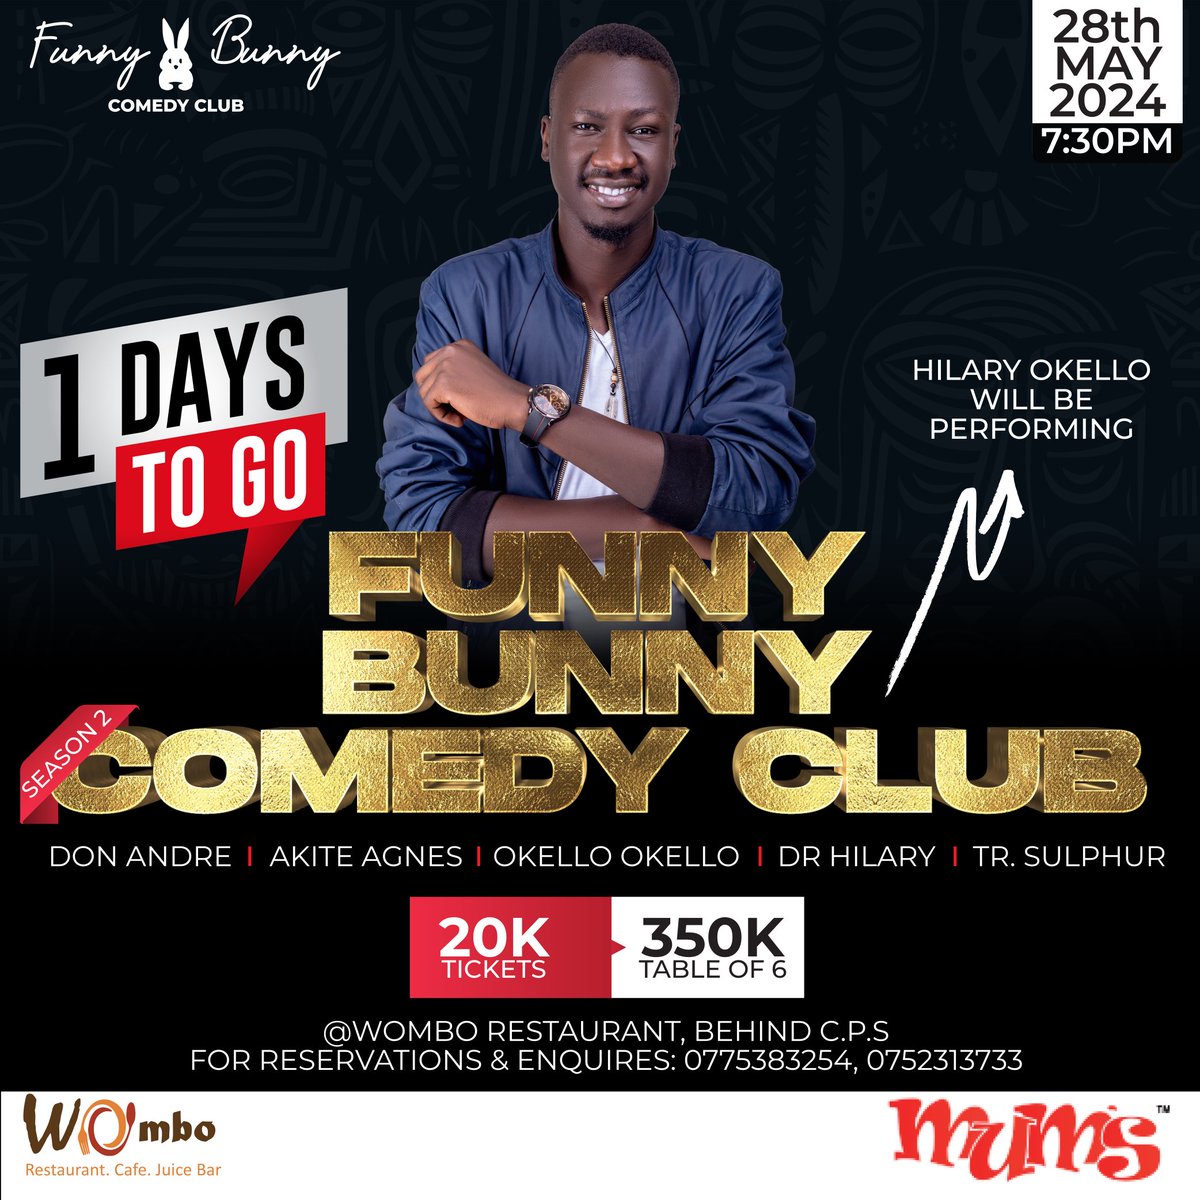 Put your salary in circulation and buy that ticket.☺️🙏 #FunnyBunnyComedyClub